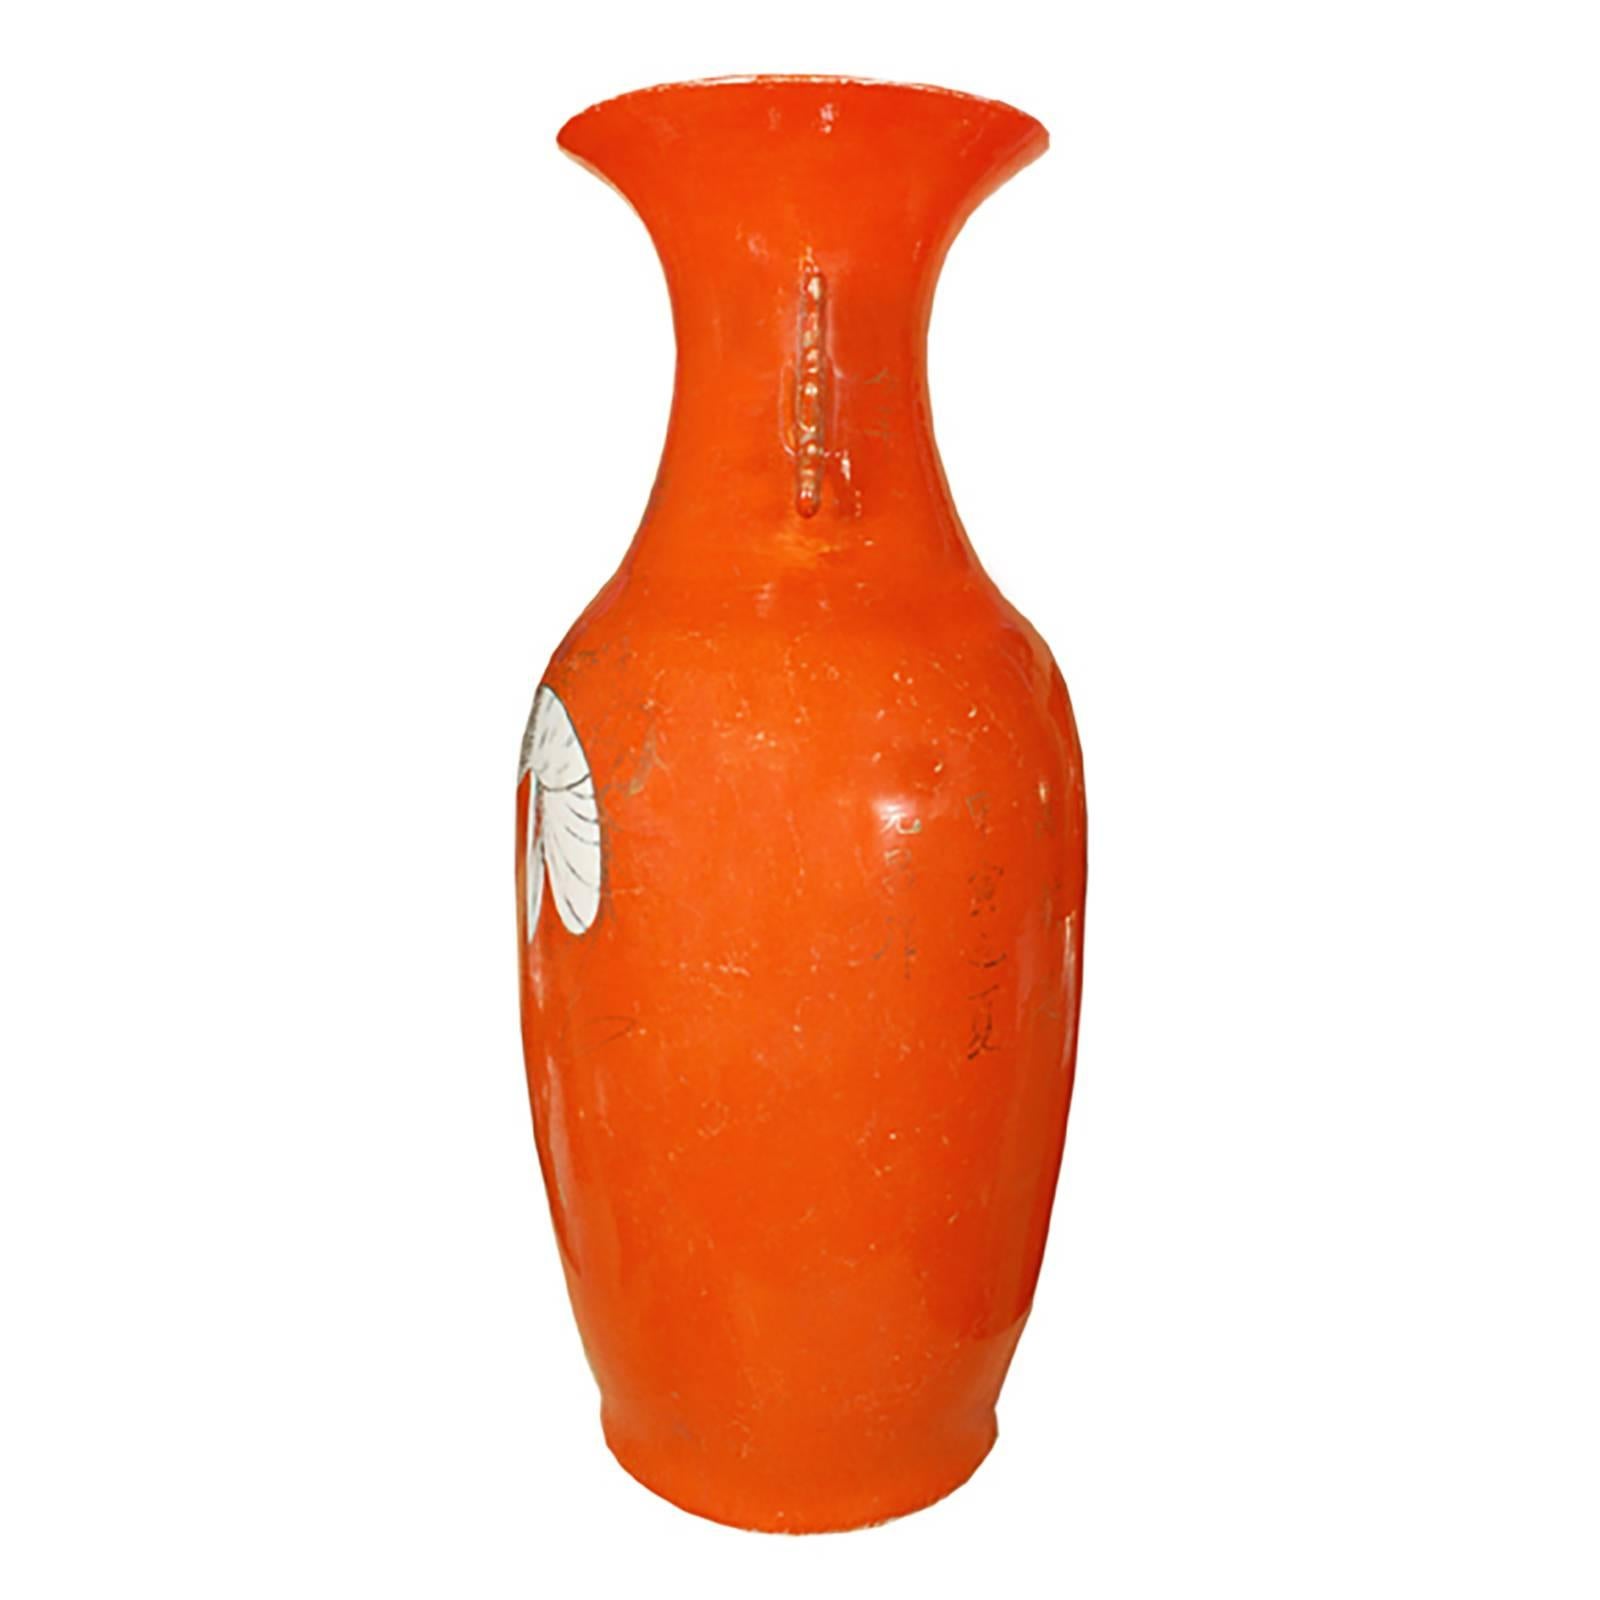 Glazed Chinese Persimmon and White Crane Phoenix Tail Vase with Handles